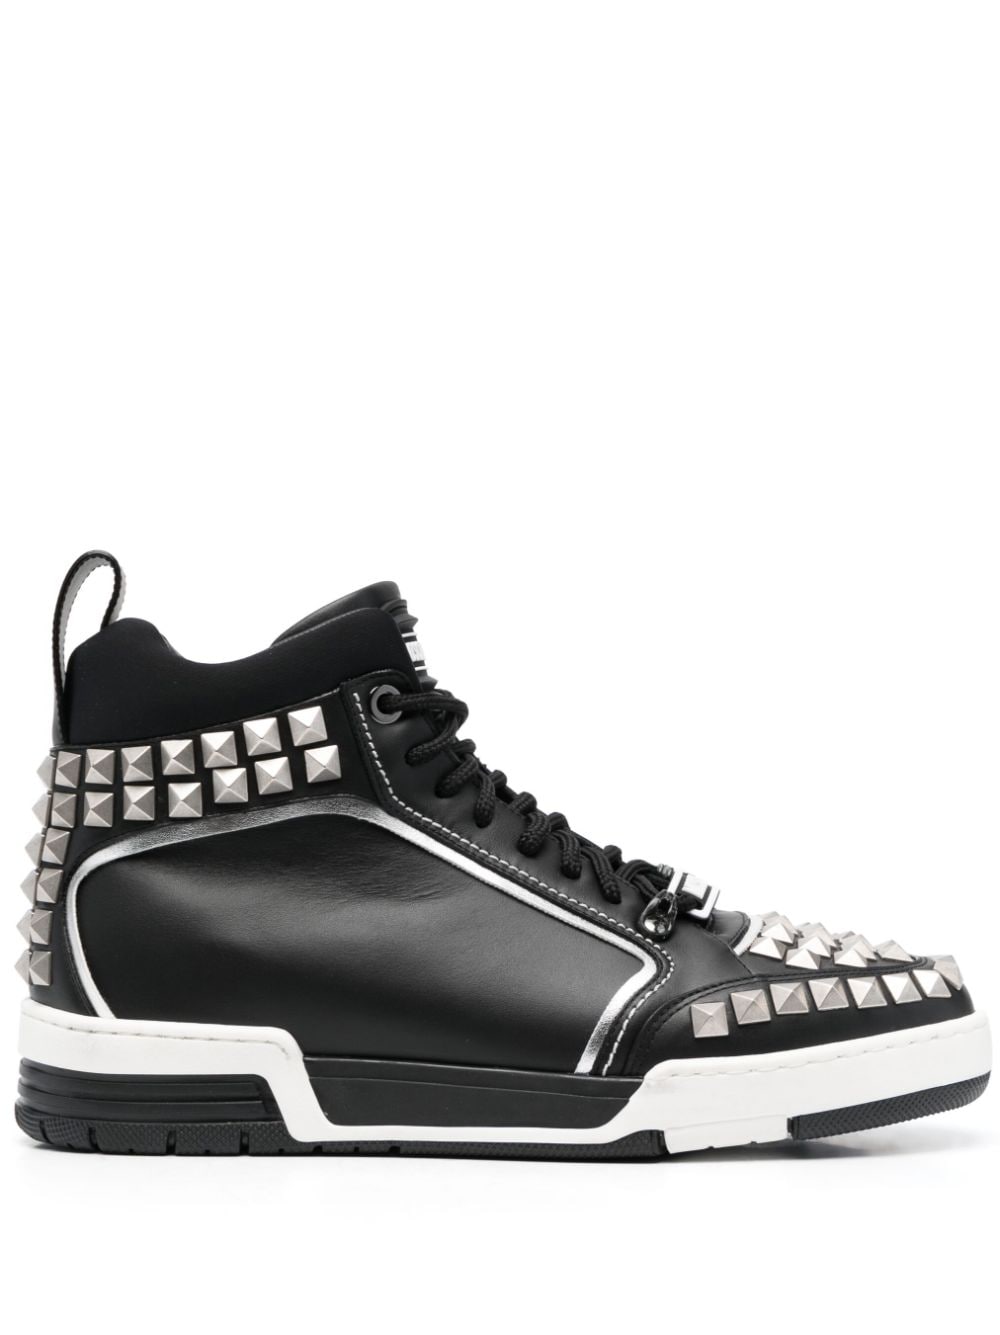 Moschino Stud-embellished High-top Sneakers In Black